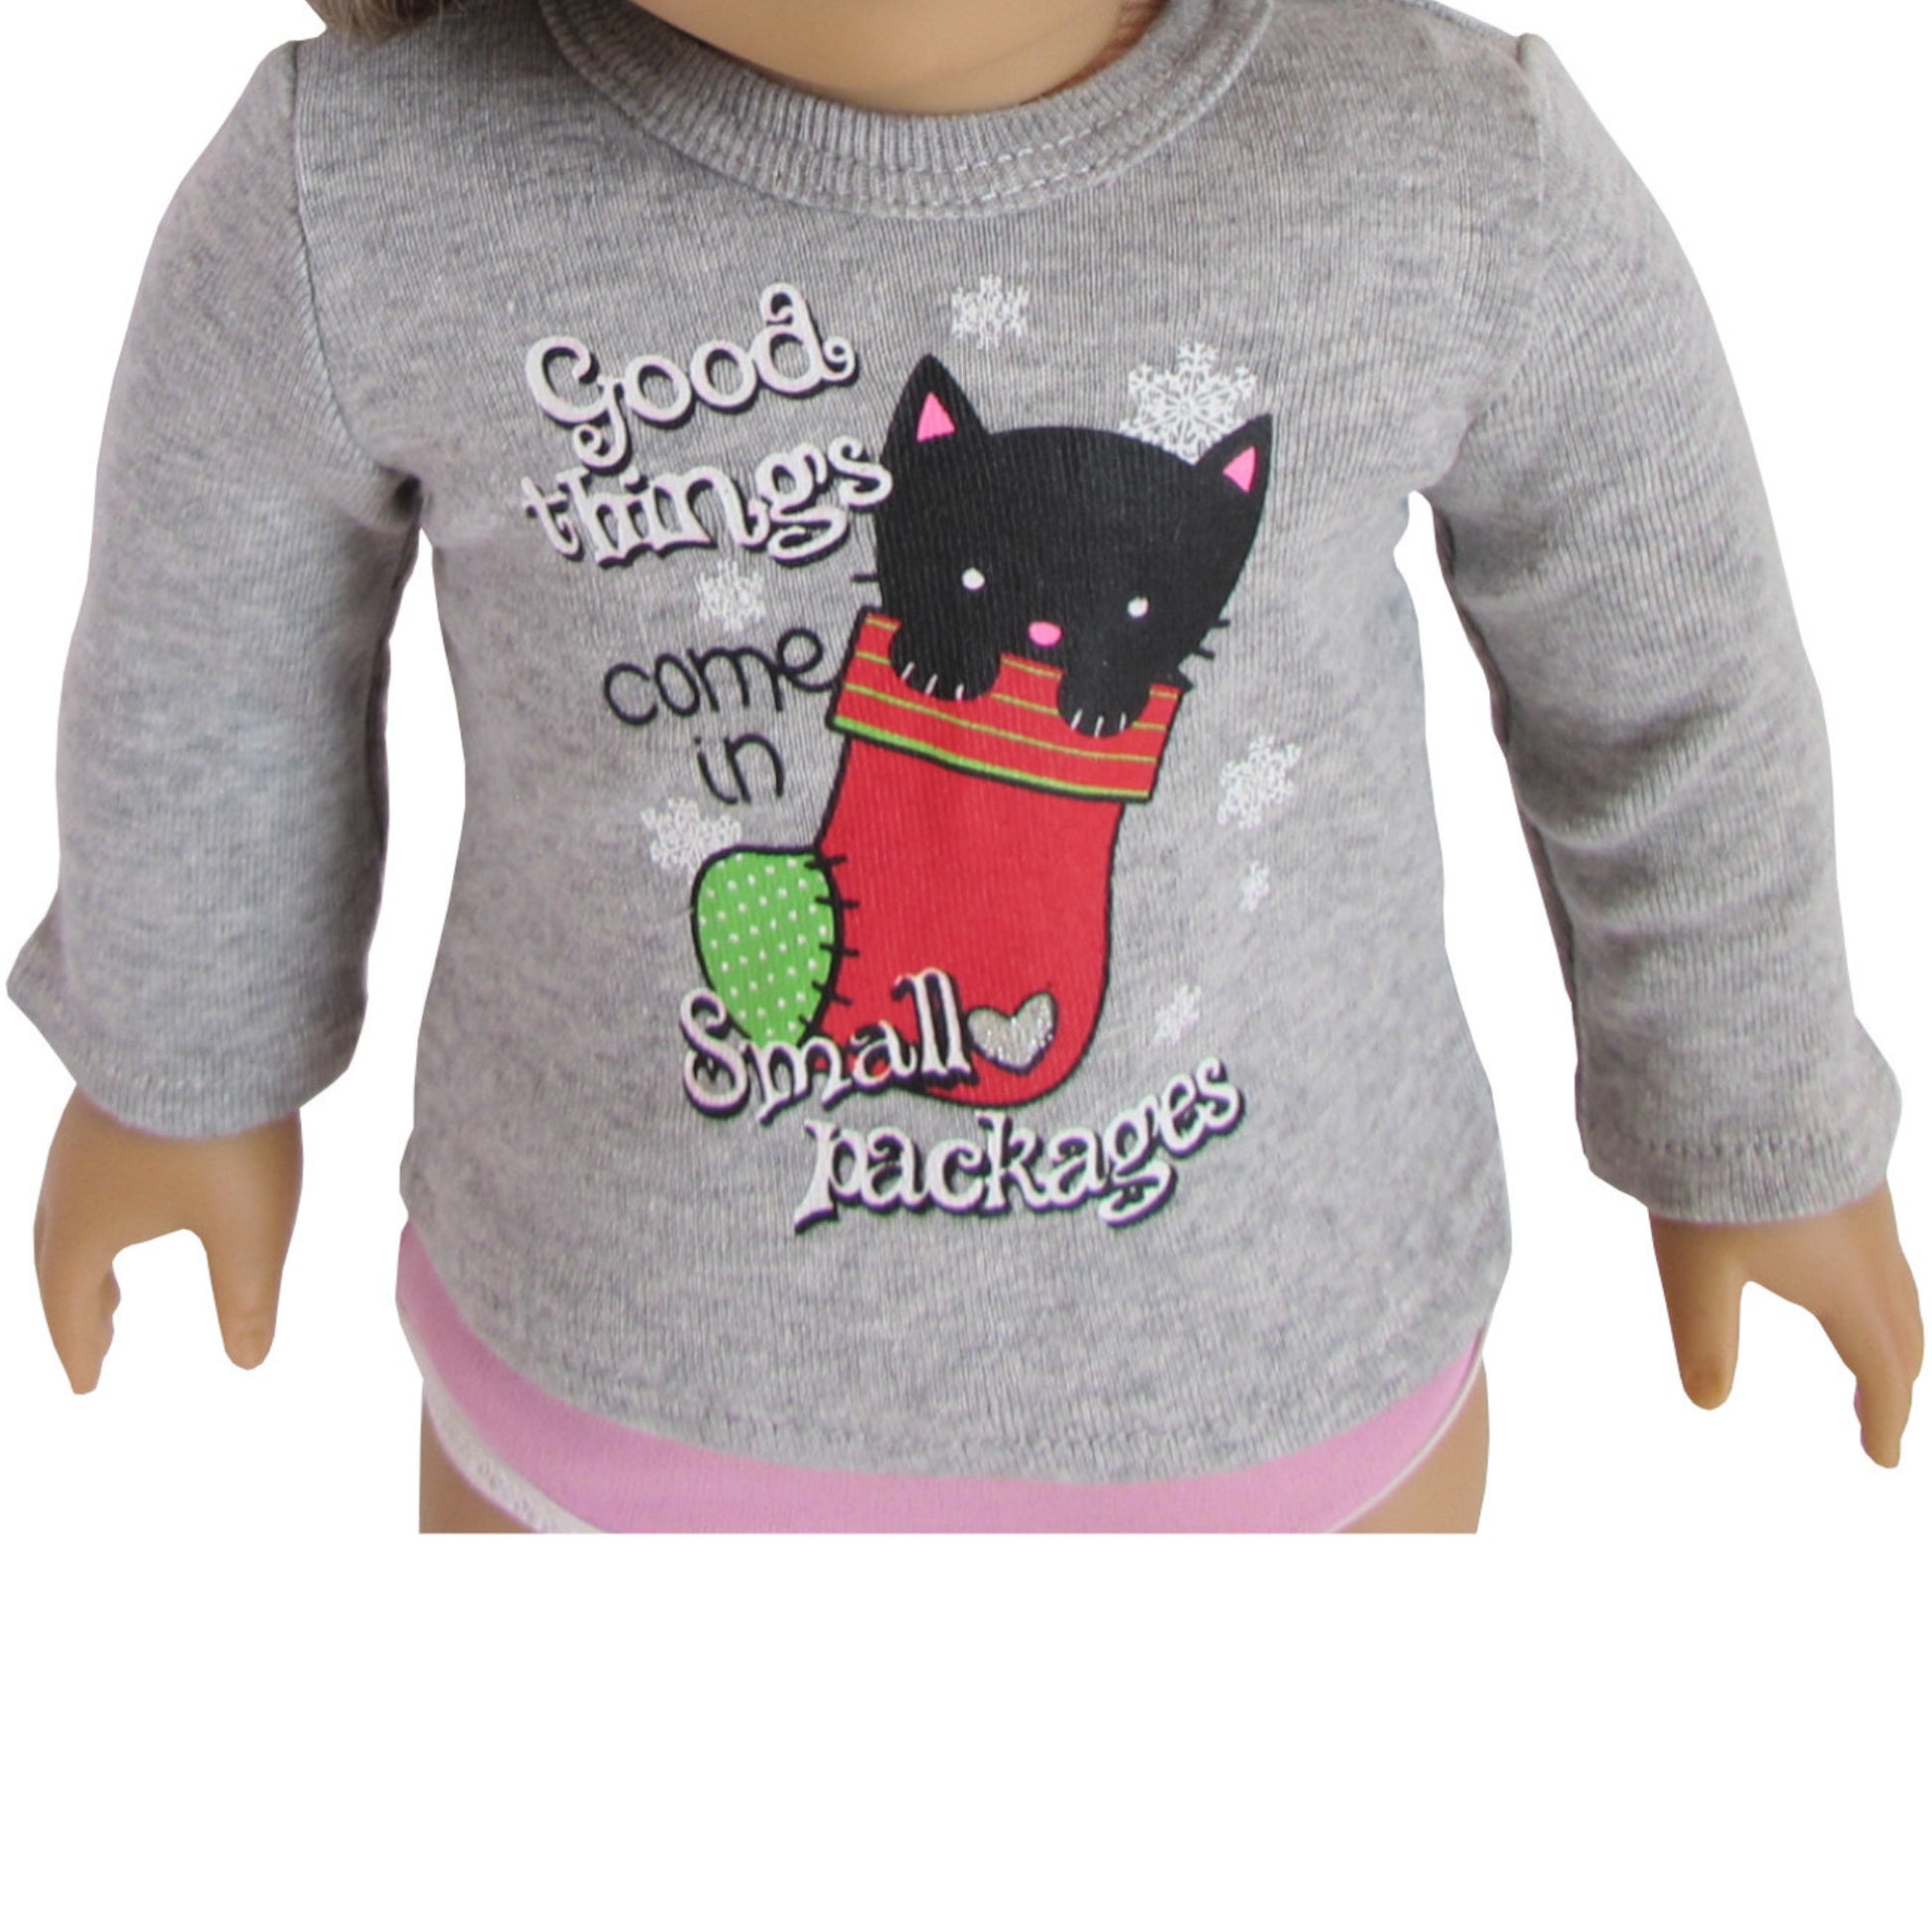 Good Things Come in Small Packages Long Sleeve T-Shirt for 18-inch dolls with doll